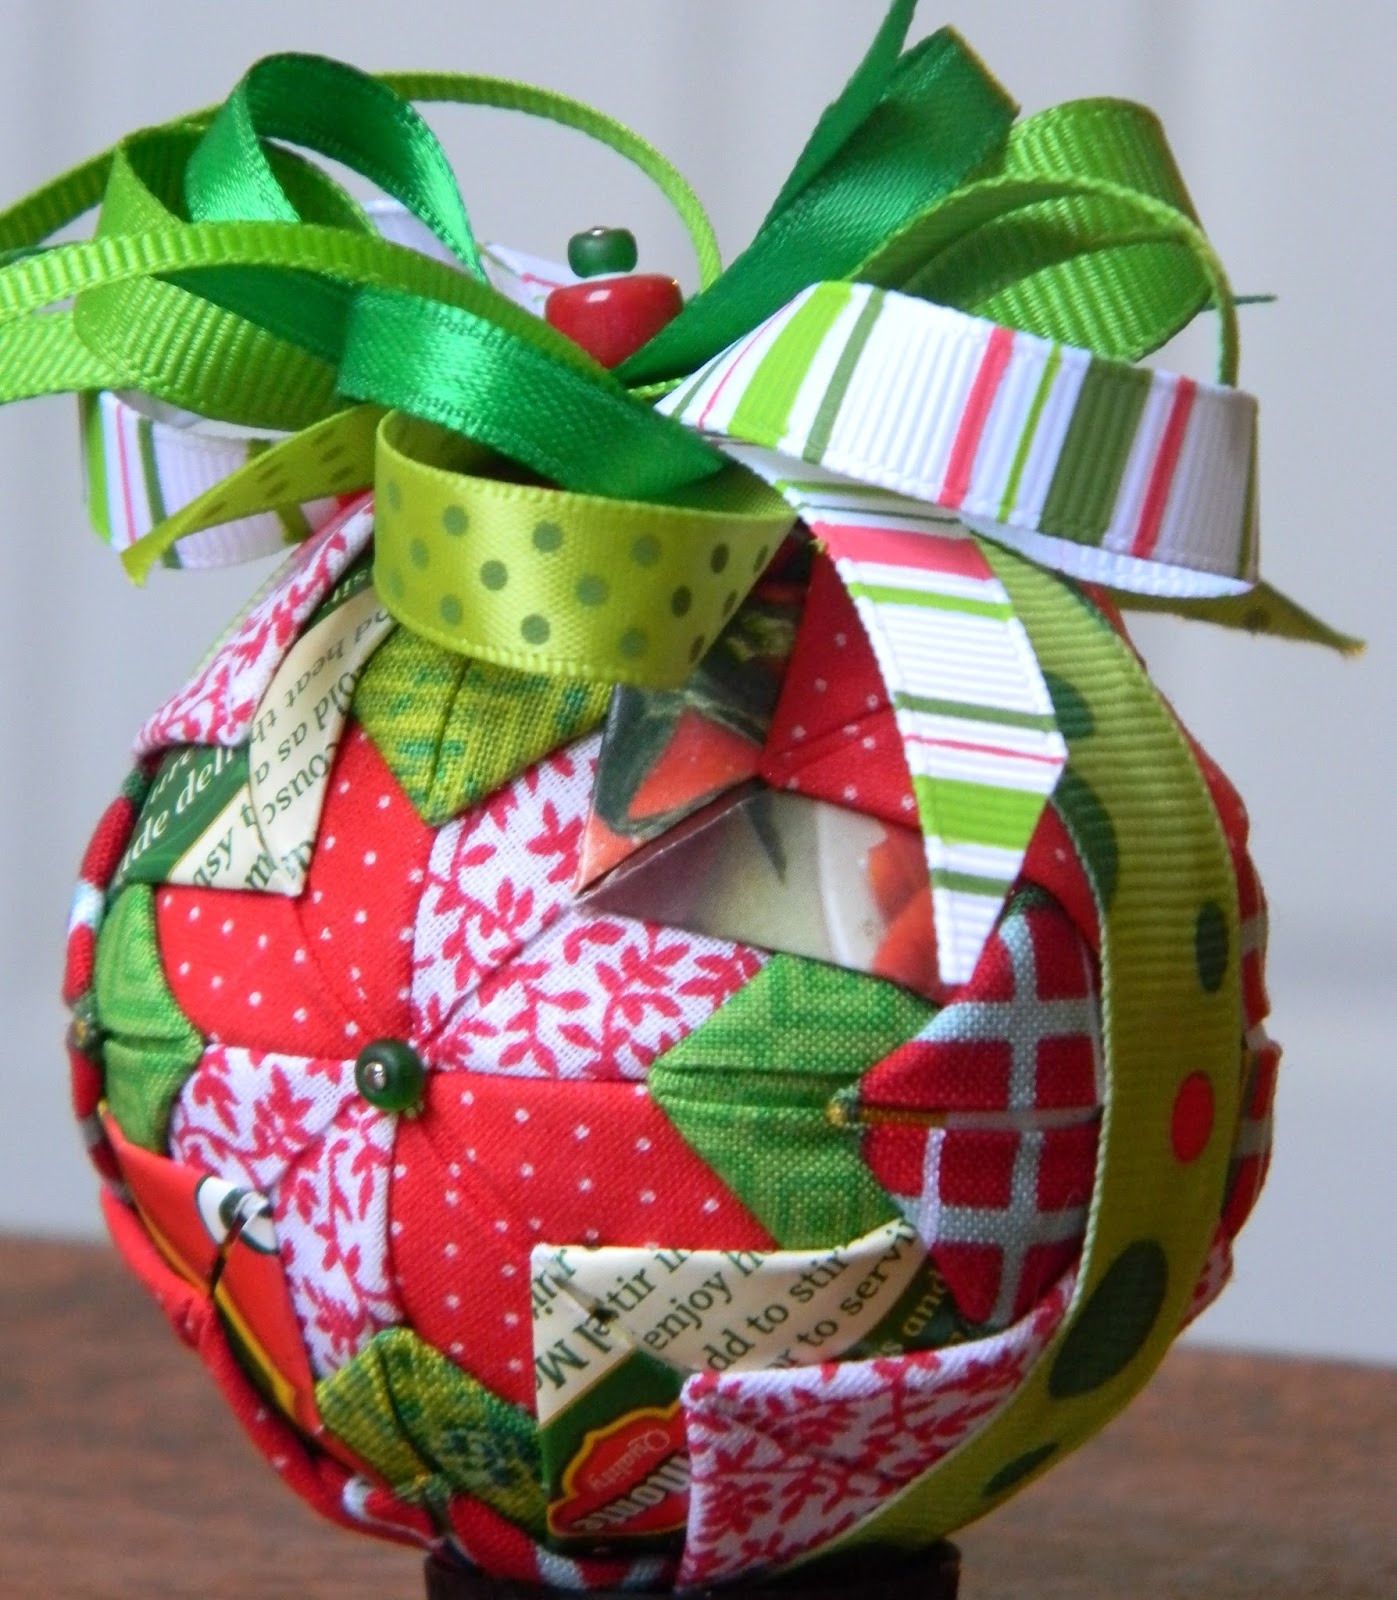 How to Recycle Recycled Christmas Ball Ornaments